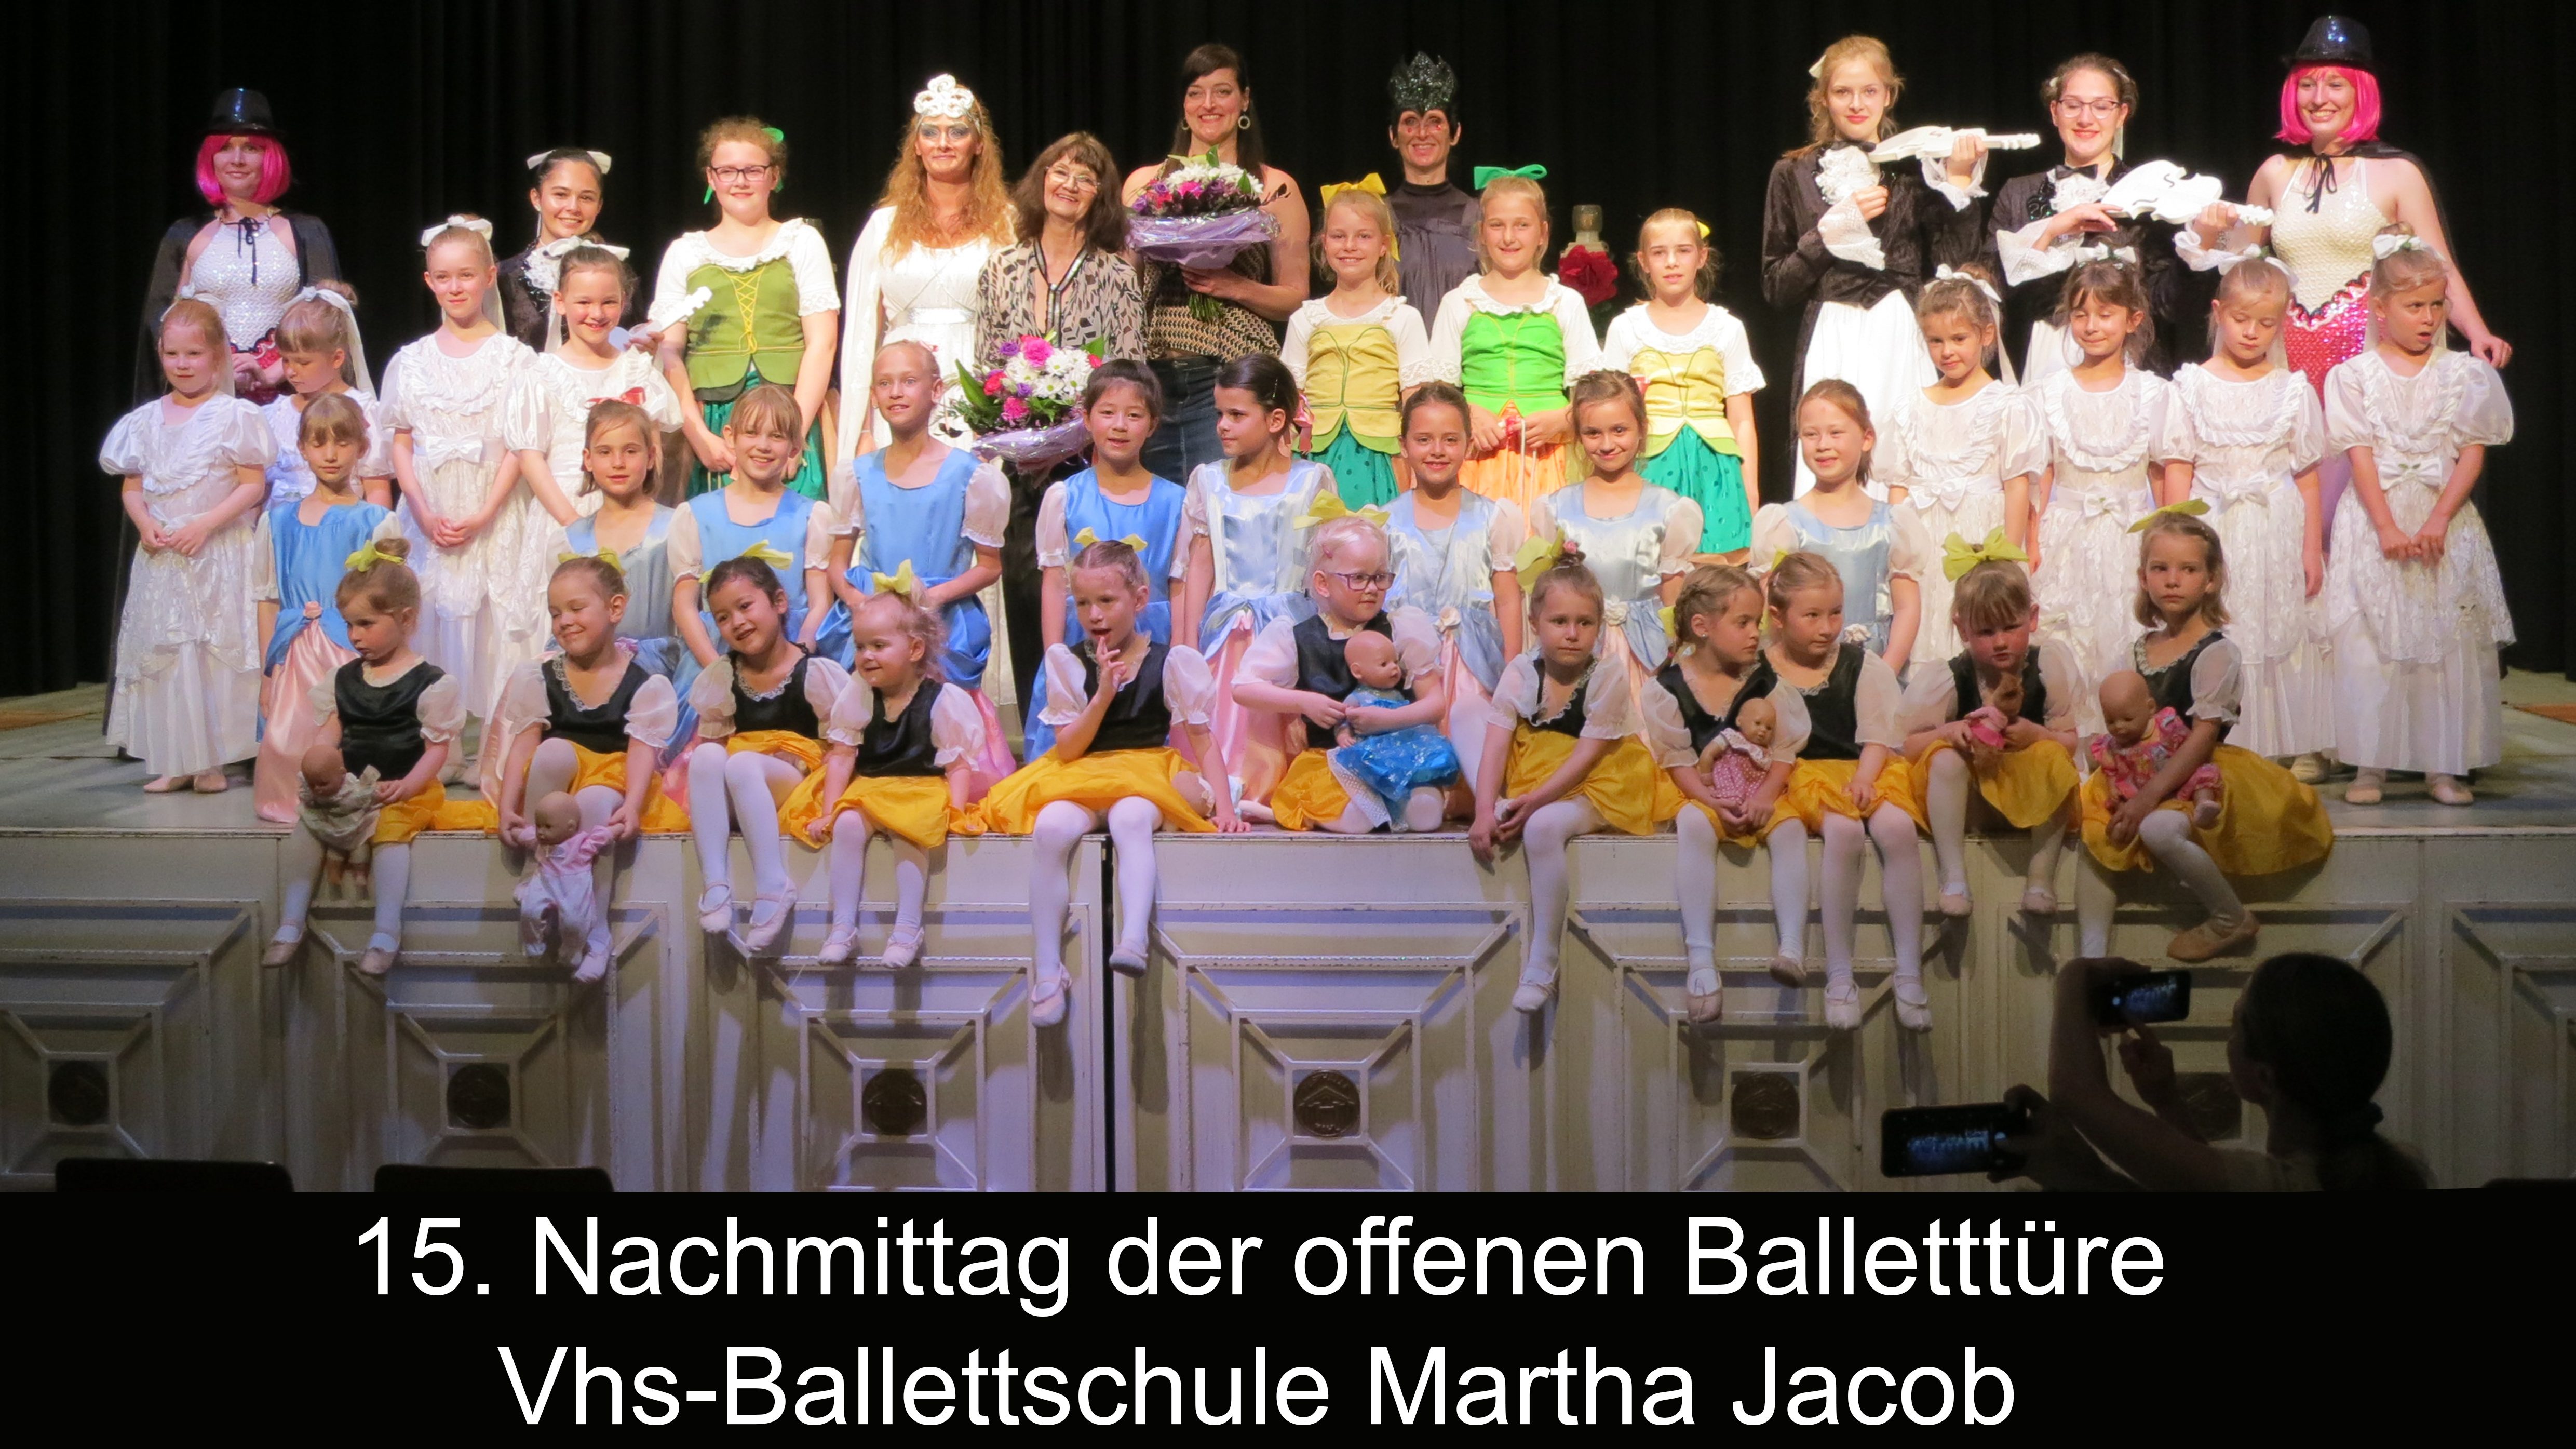 You are currently viewing Ballettnachmittag 2020